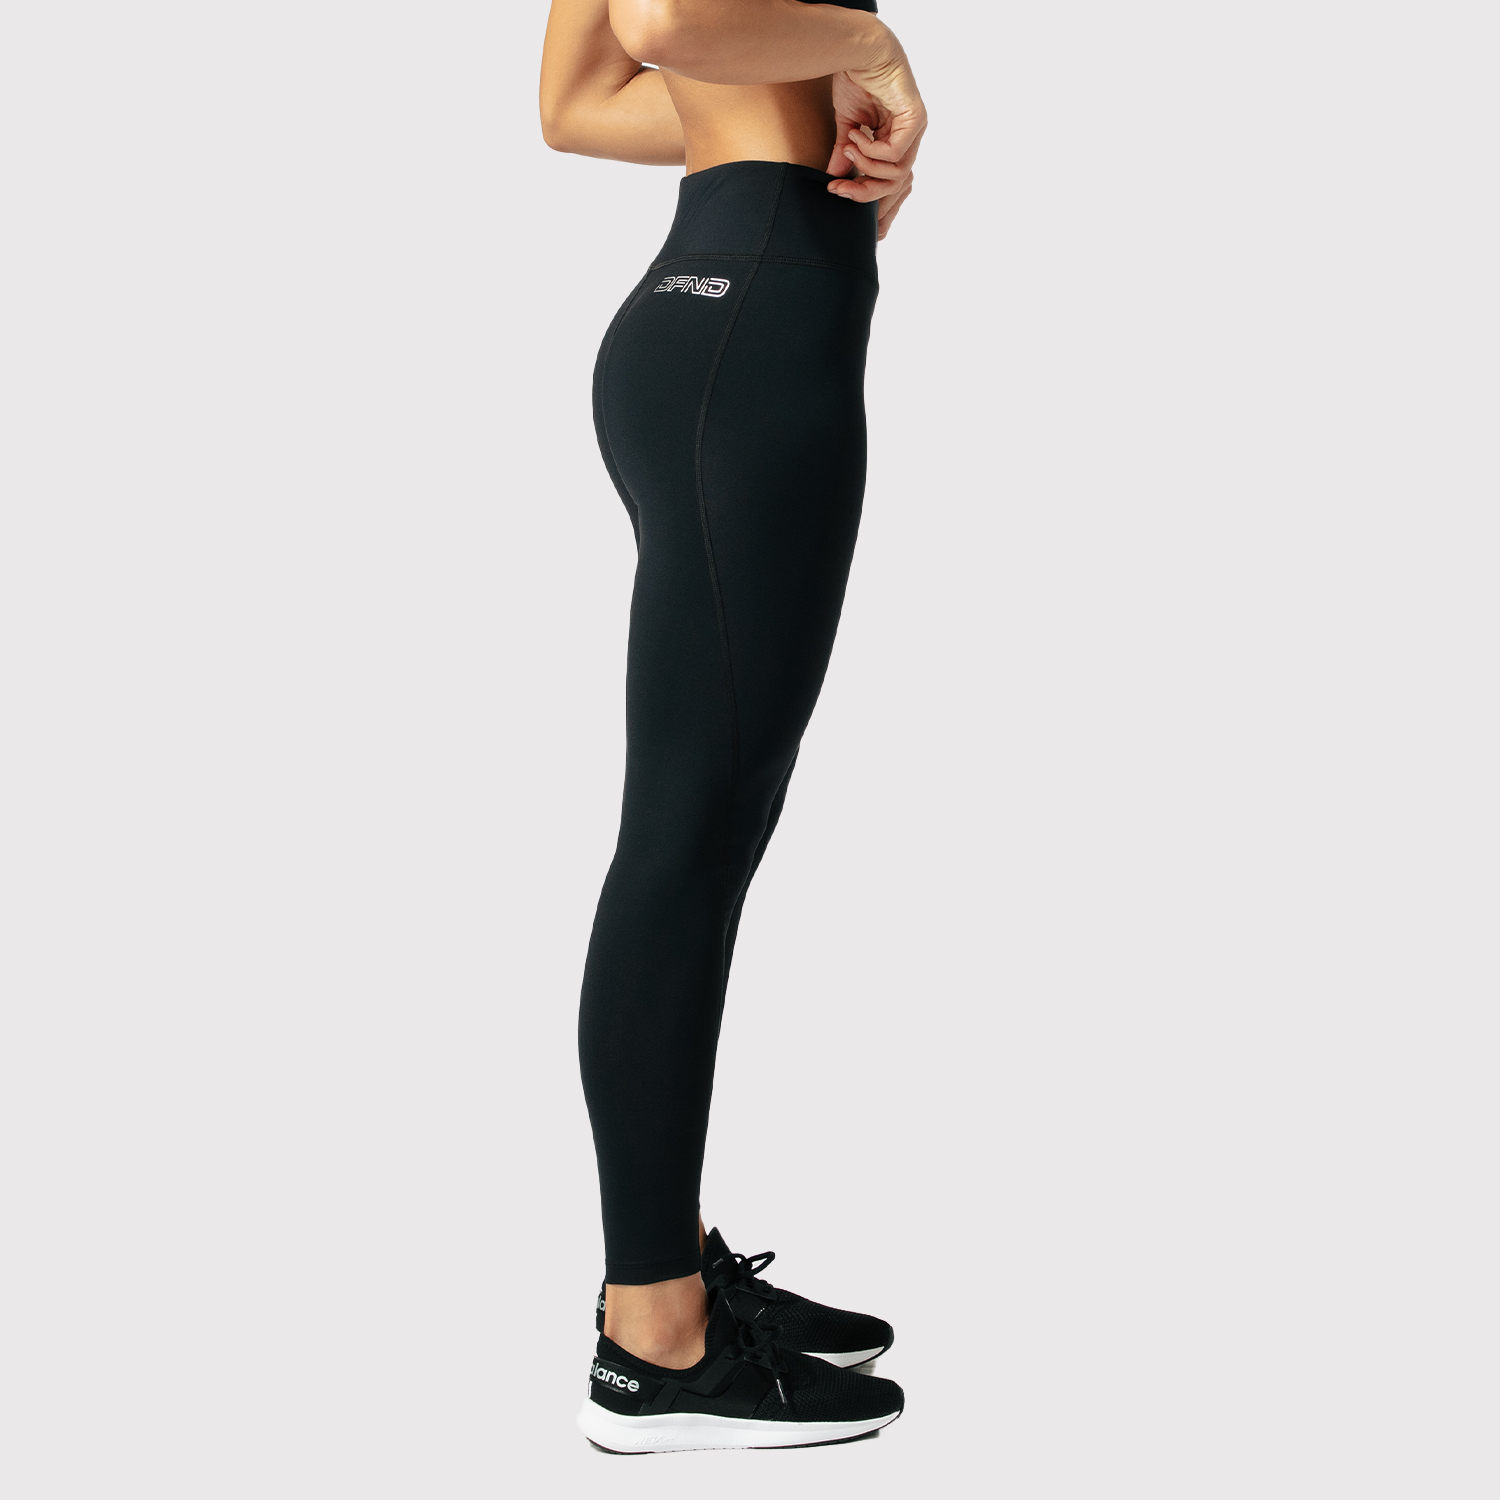  22 Womens Yoga Leggings High Compression Workout